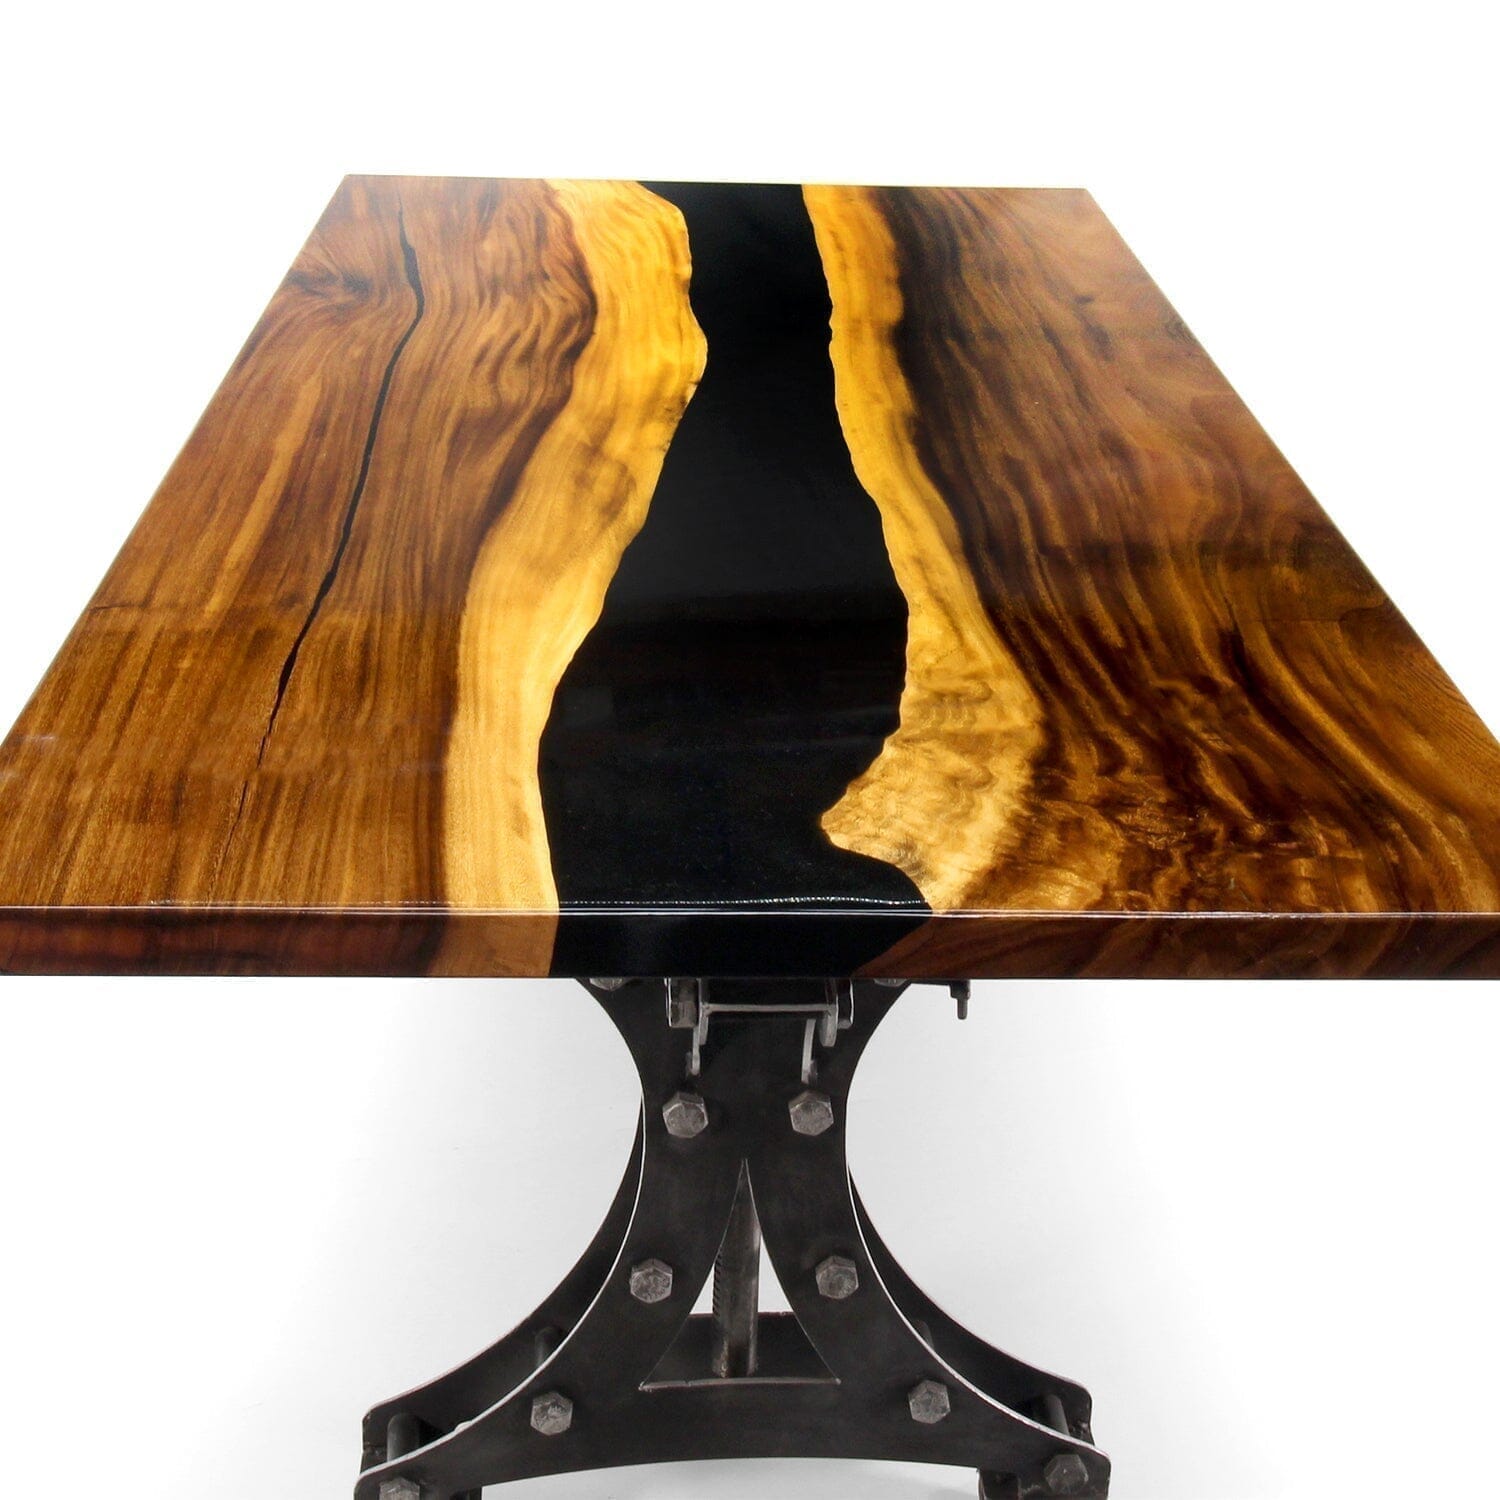 Solid Black Walnut Wood Epoxy Resin River Dining Table – Earthly